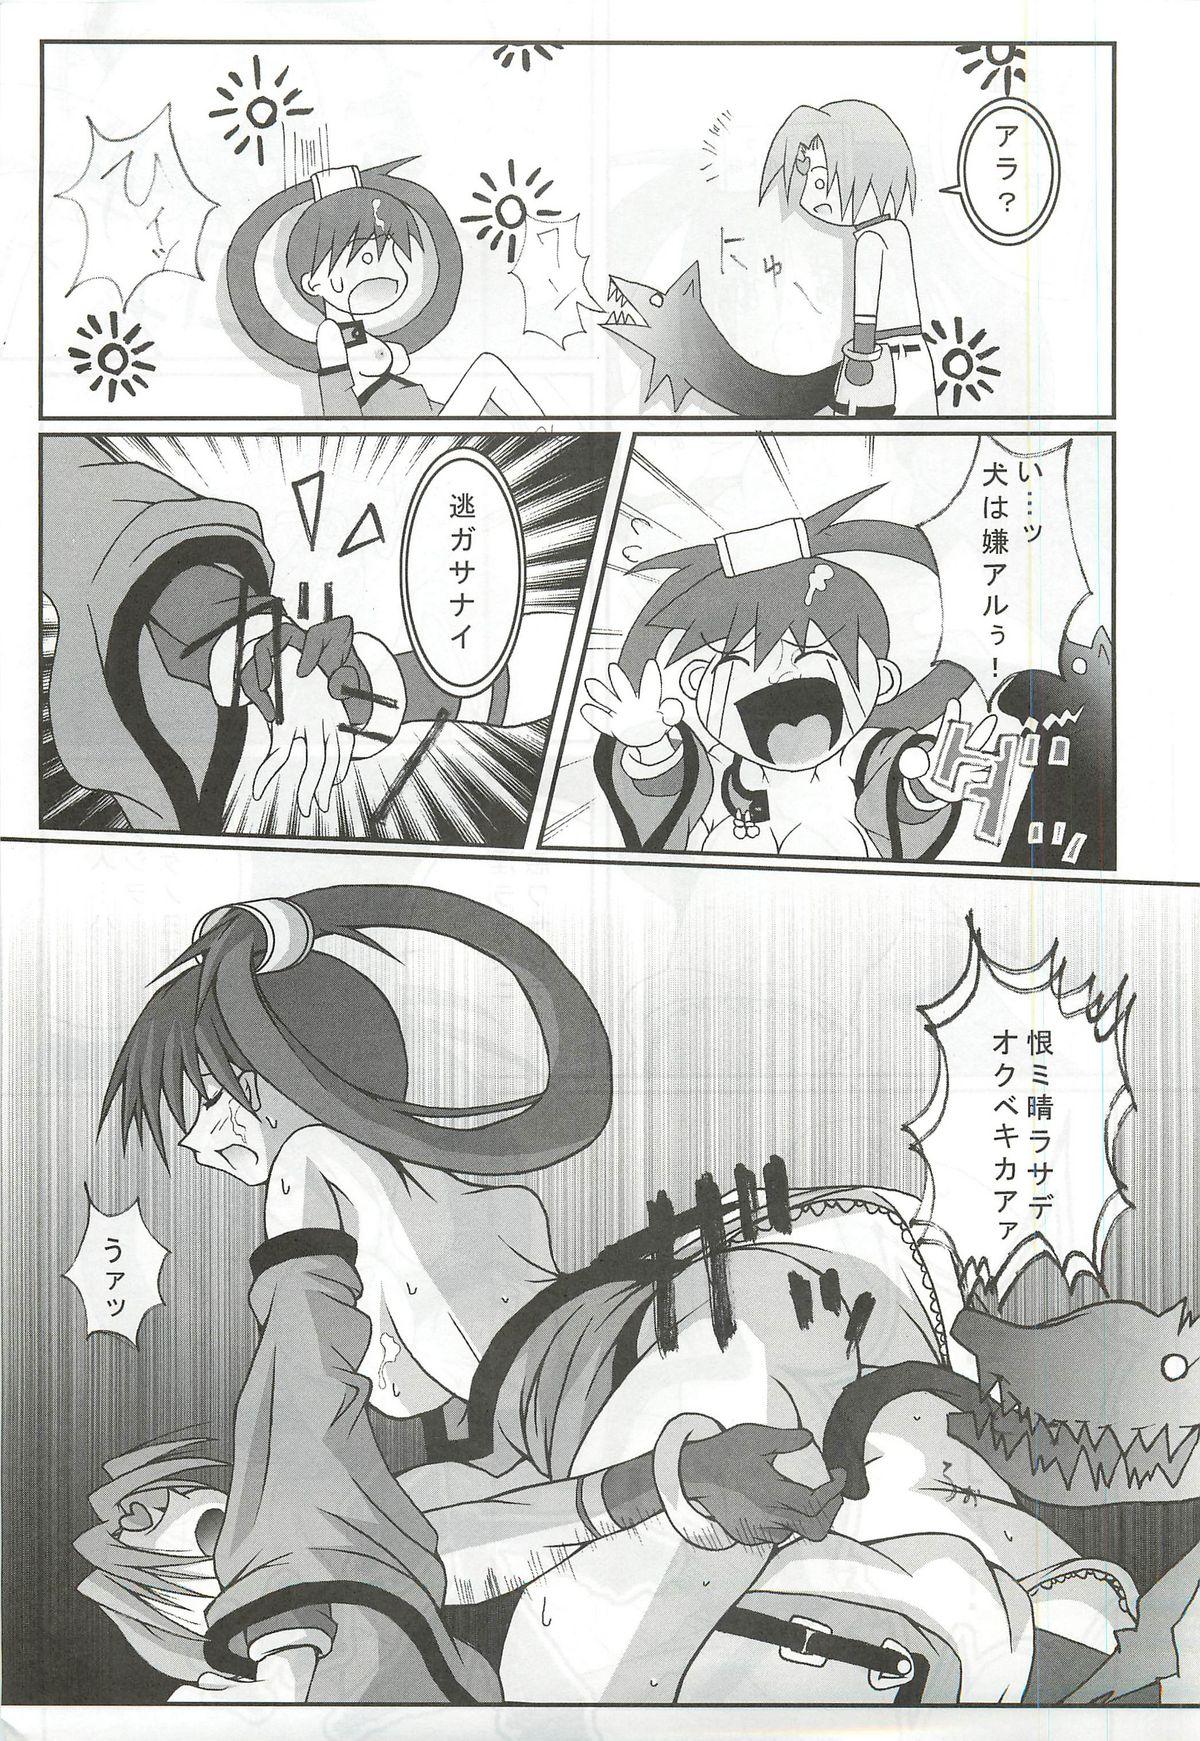 Indonesia Passionless 2 - Guilty gear Mas - Page 8